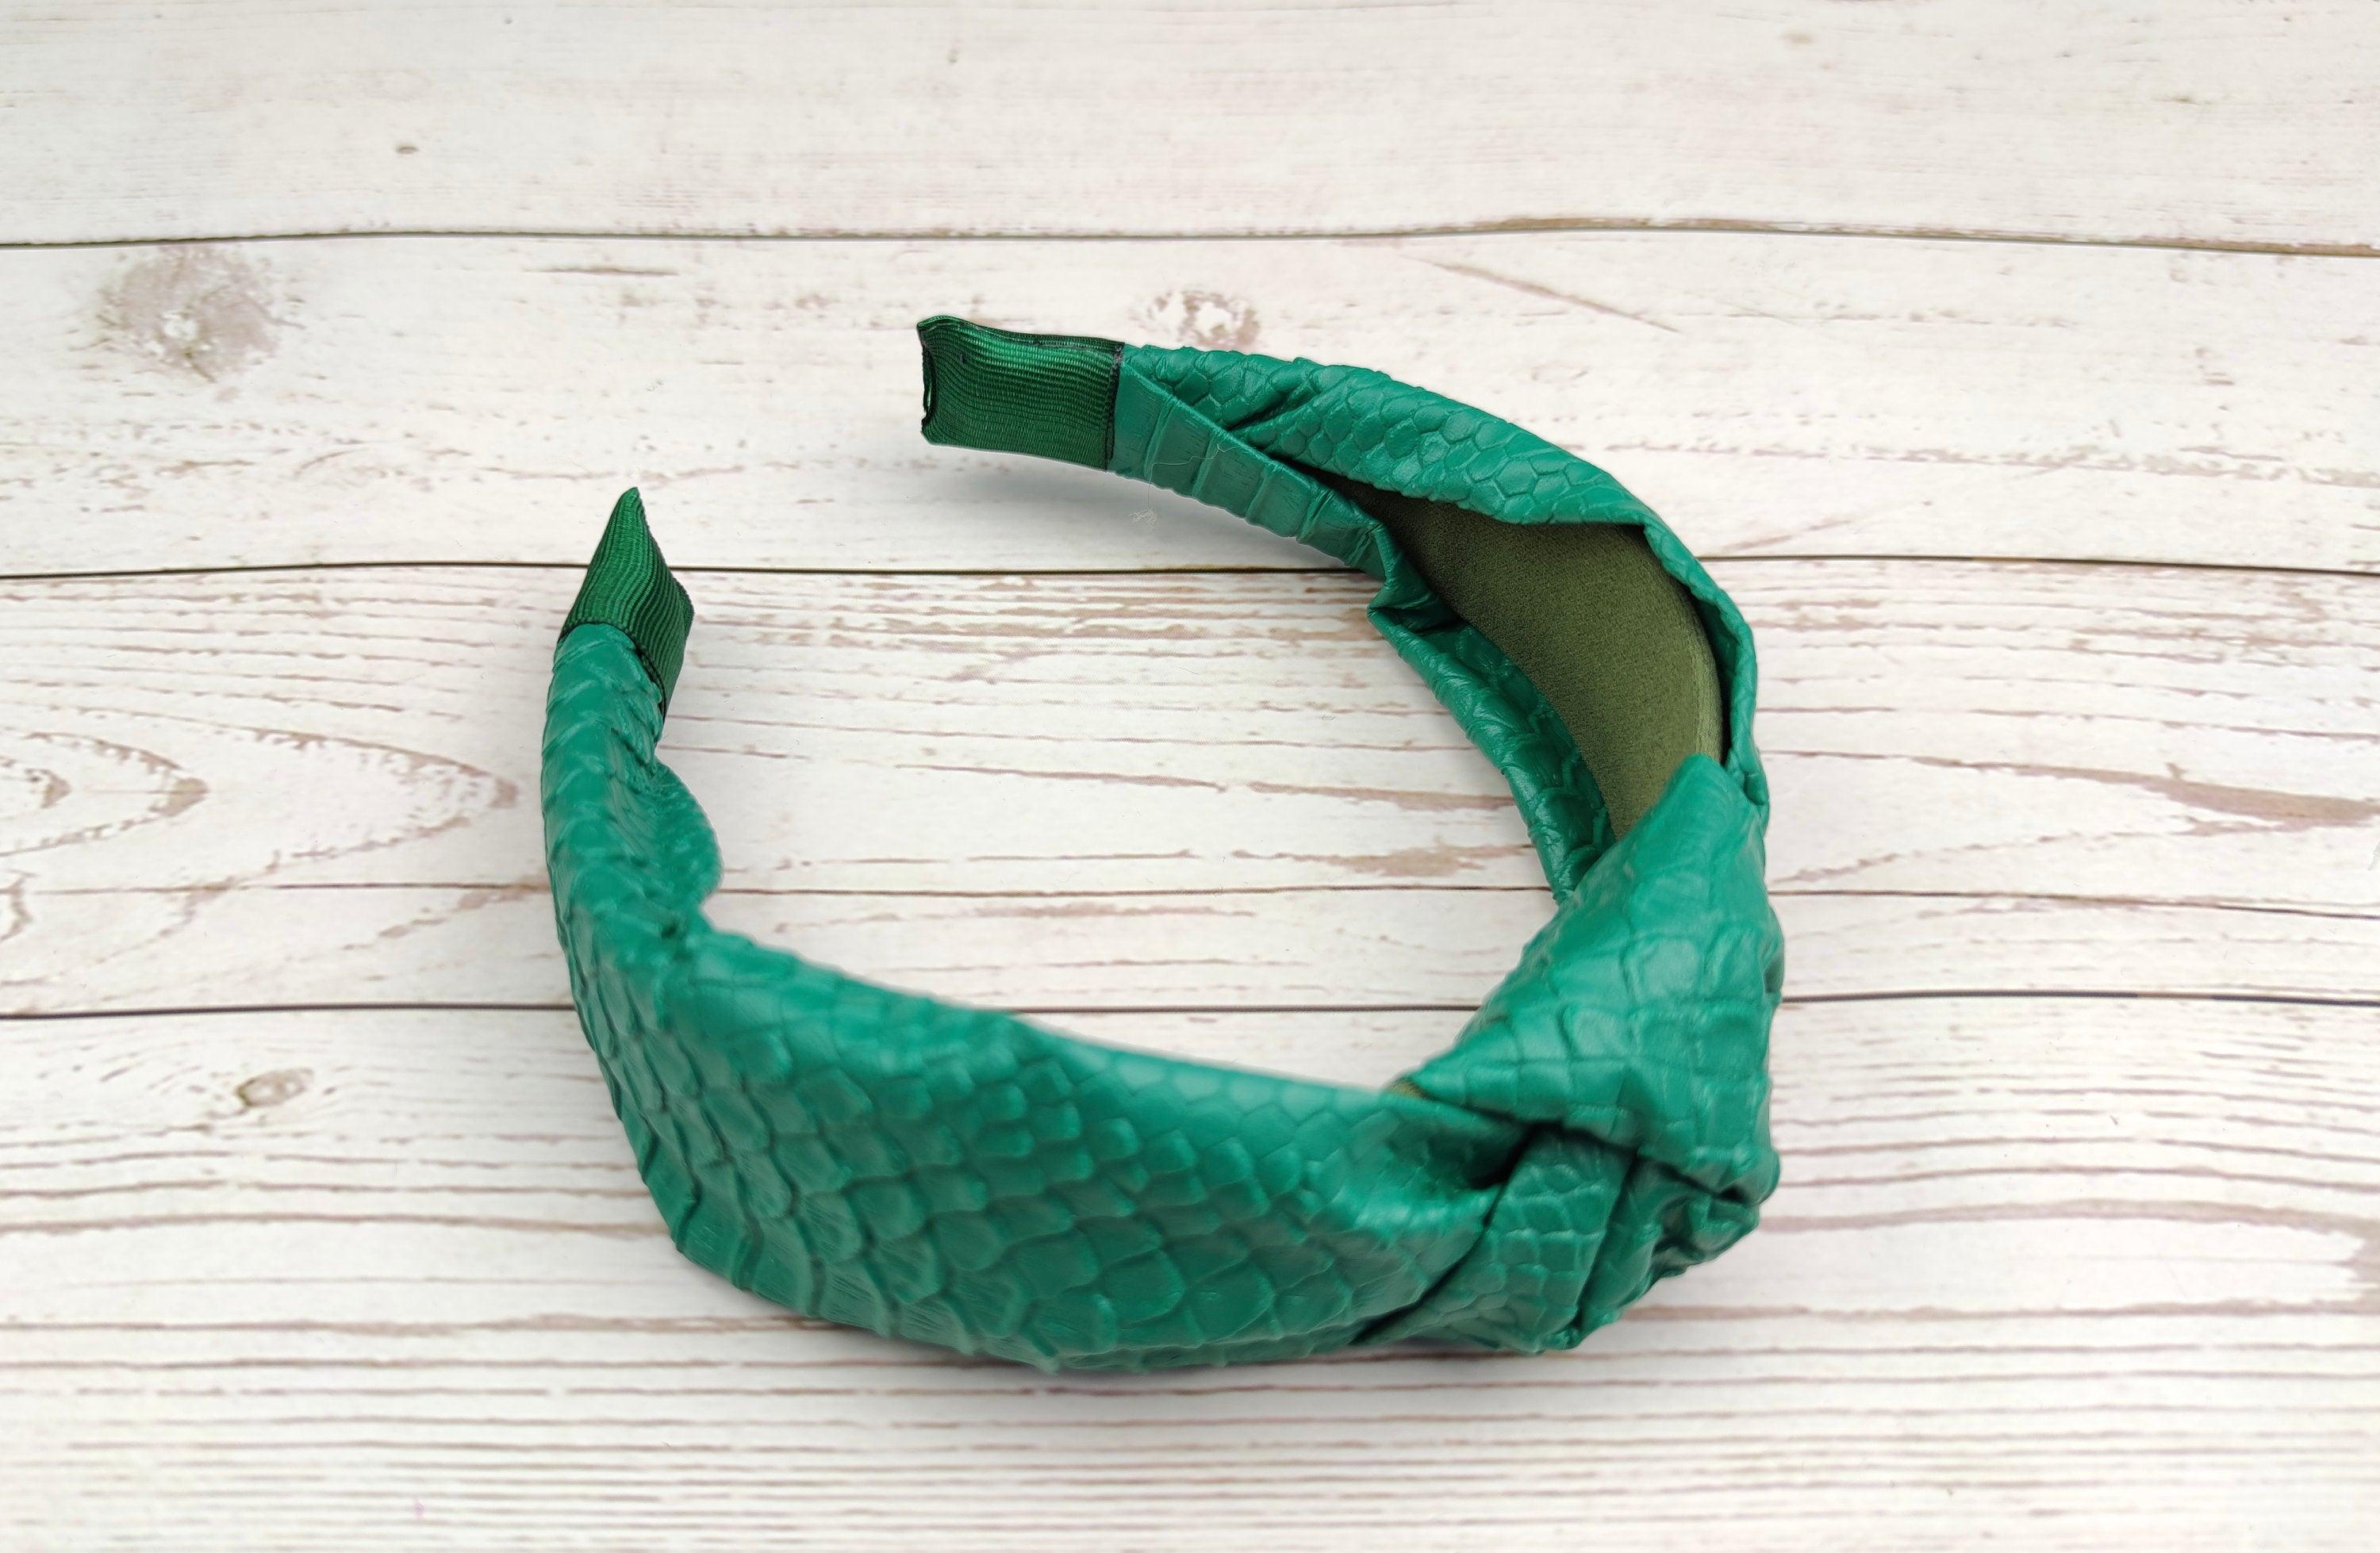 Delicate Green Faux Leather Twist Headband with Snake Skin Pattern - Stylish and Classic Women's Hairband available at Moyoni Design